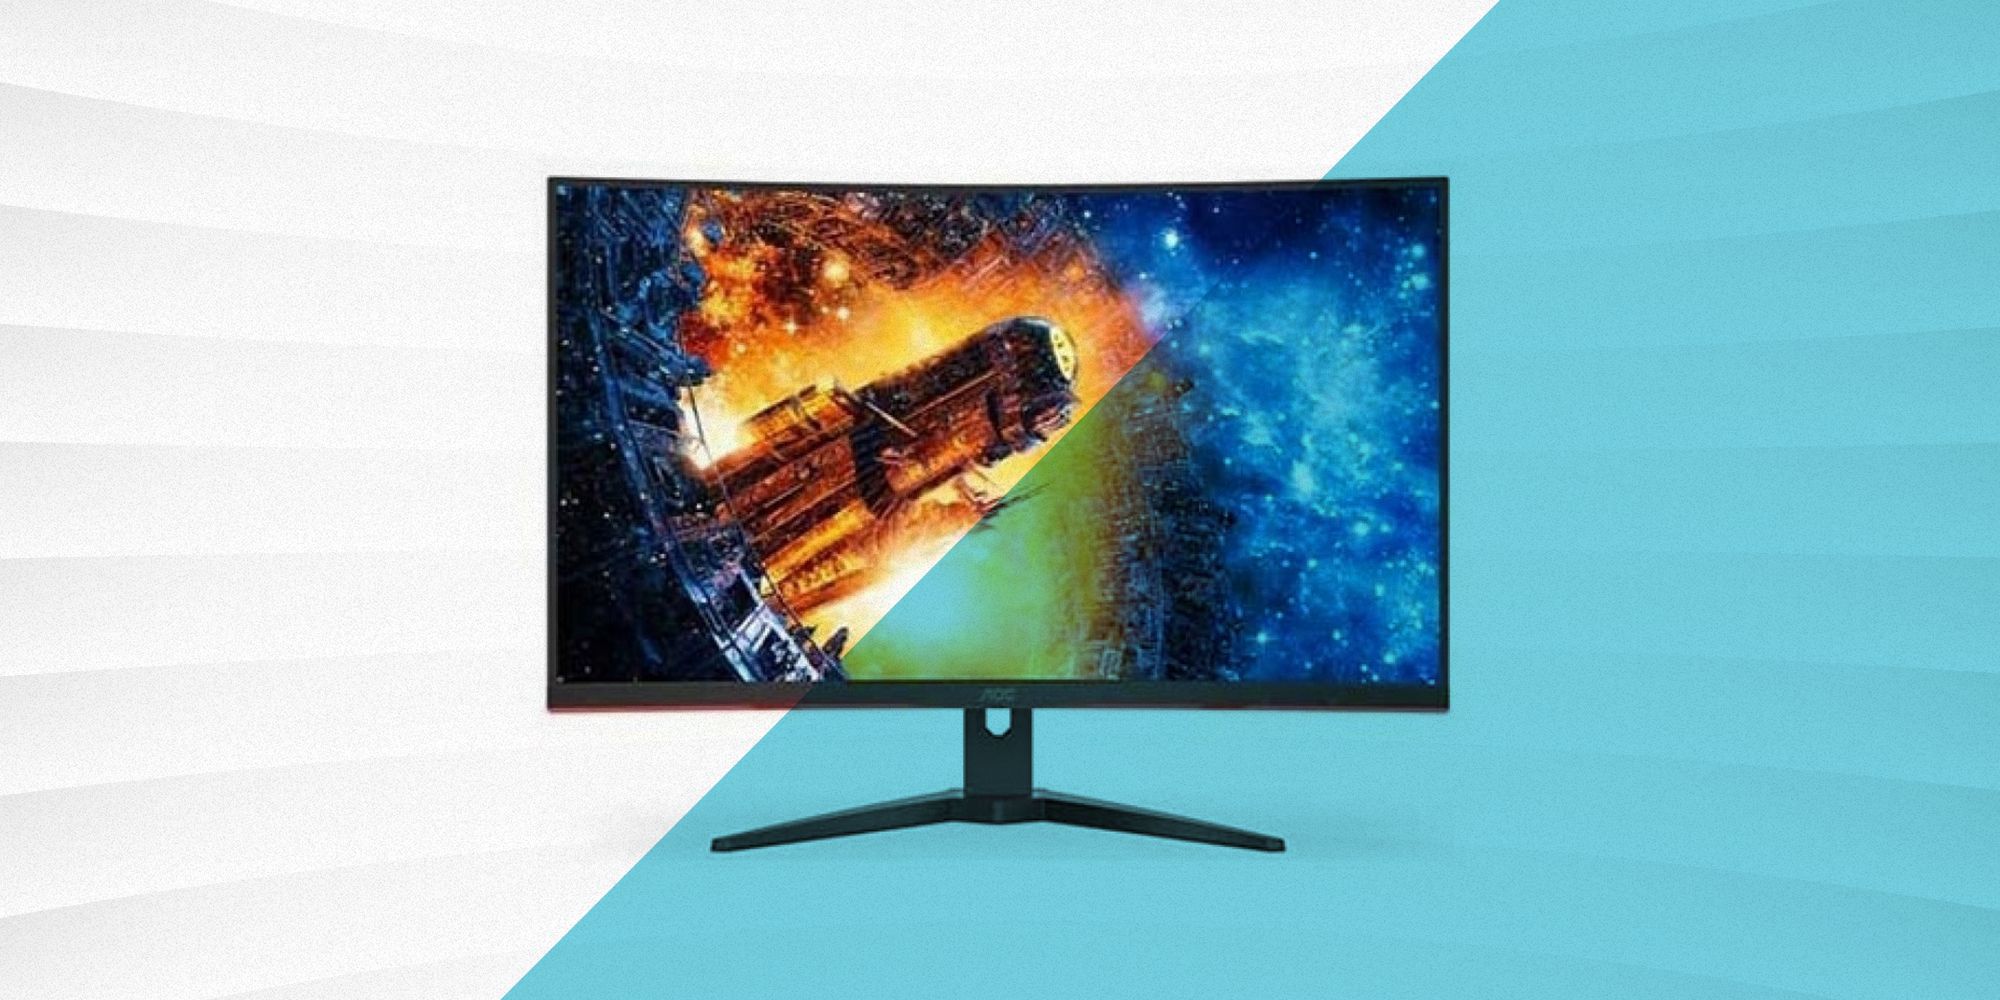 ViewSonic XG2431 240 Hz gaming monitor review: A tool for pros